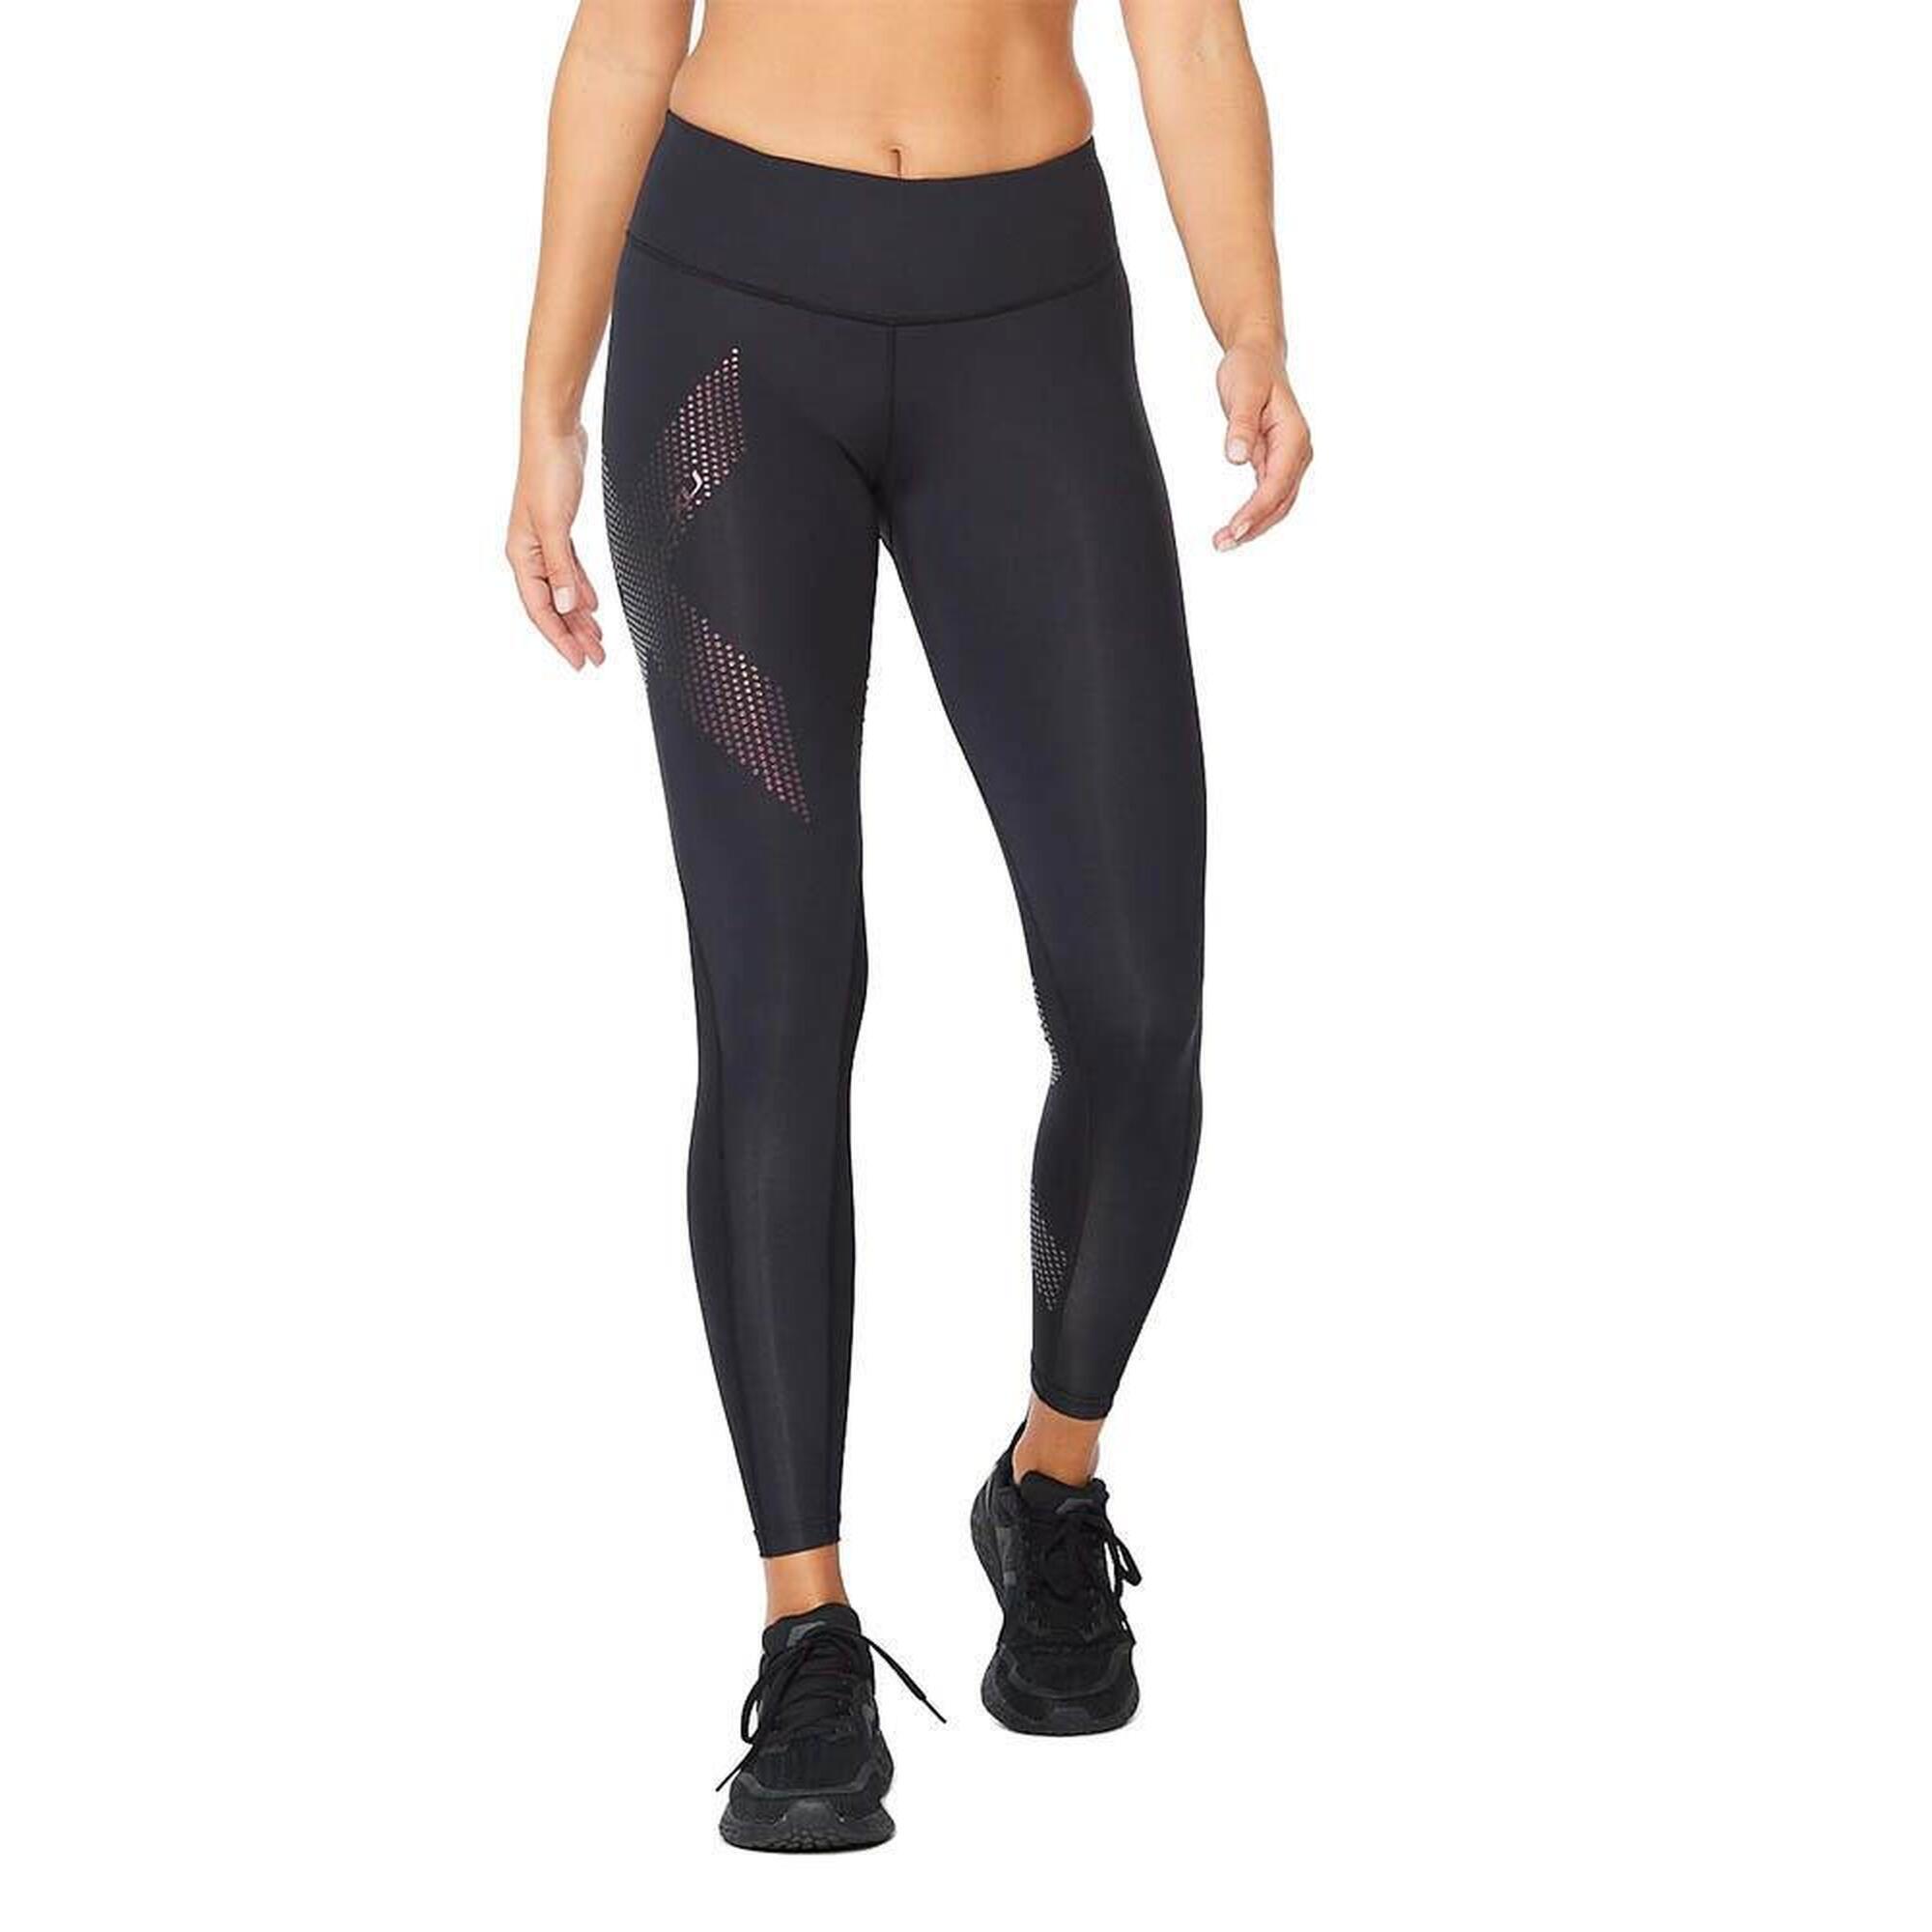 2XU 2XU Women's Motion Mid-Rise Compression Tights - Black / Cranberry - Size S